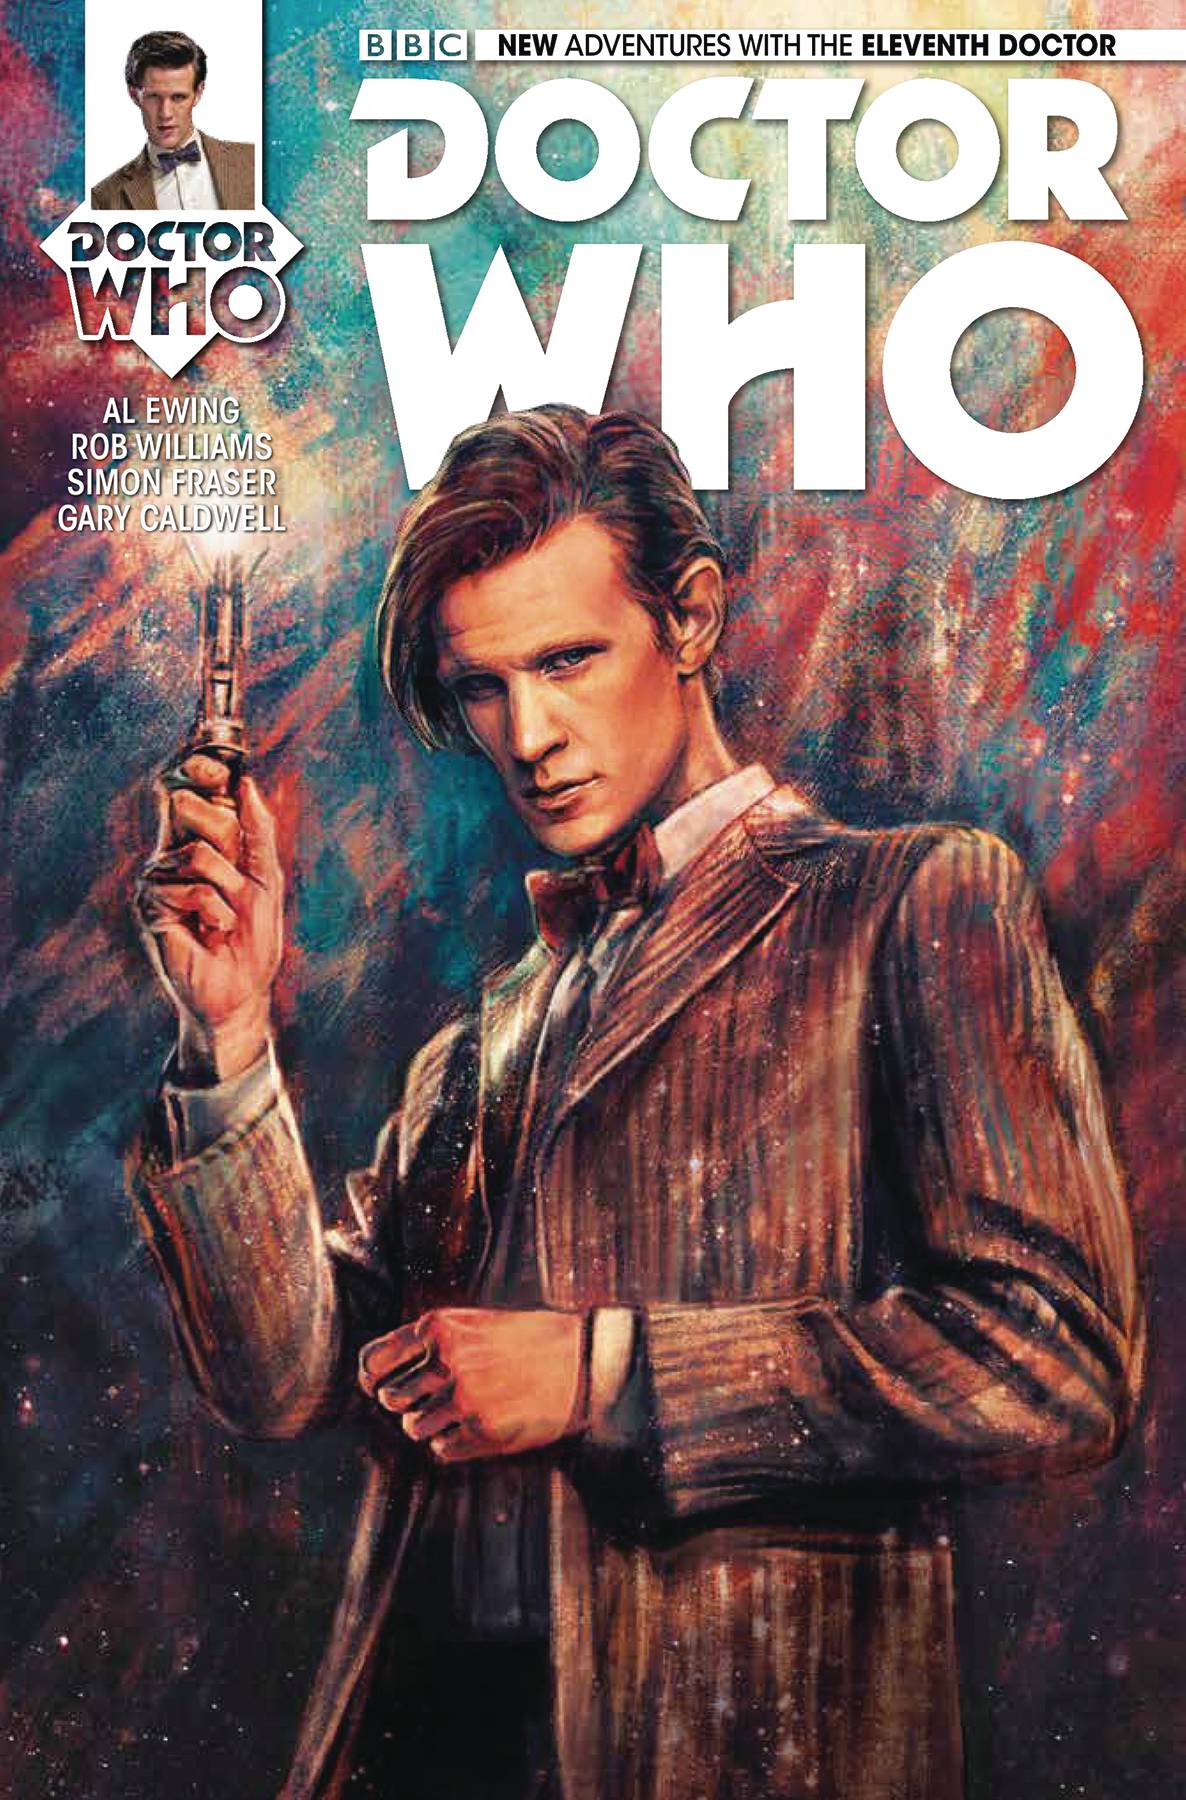 DOCTOR WHO 11TH DOCTOR #1 FACSIMILE